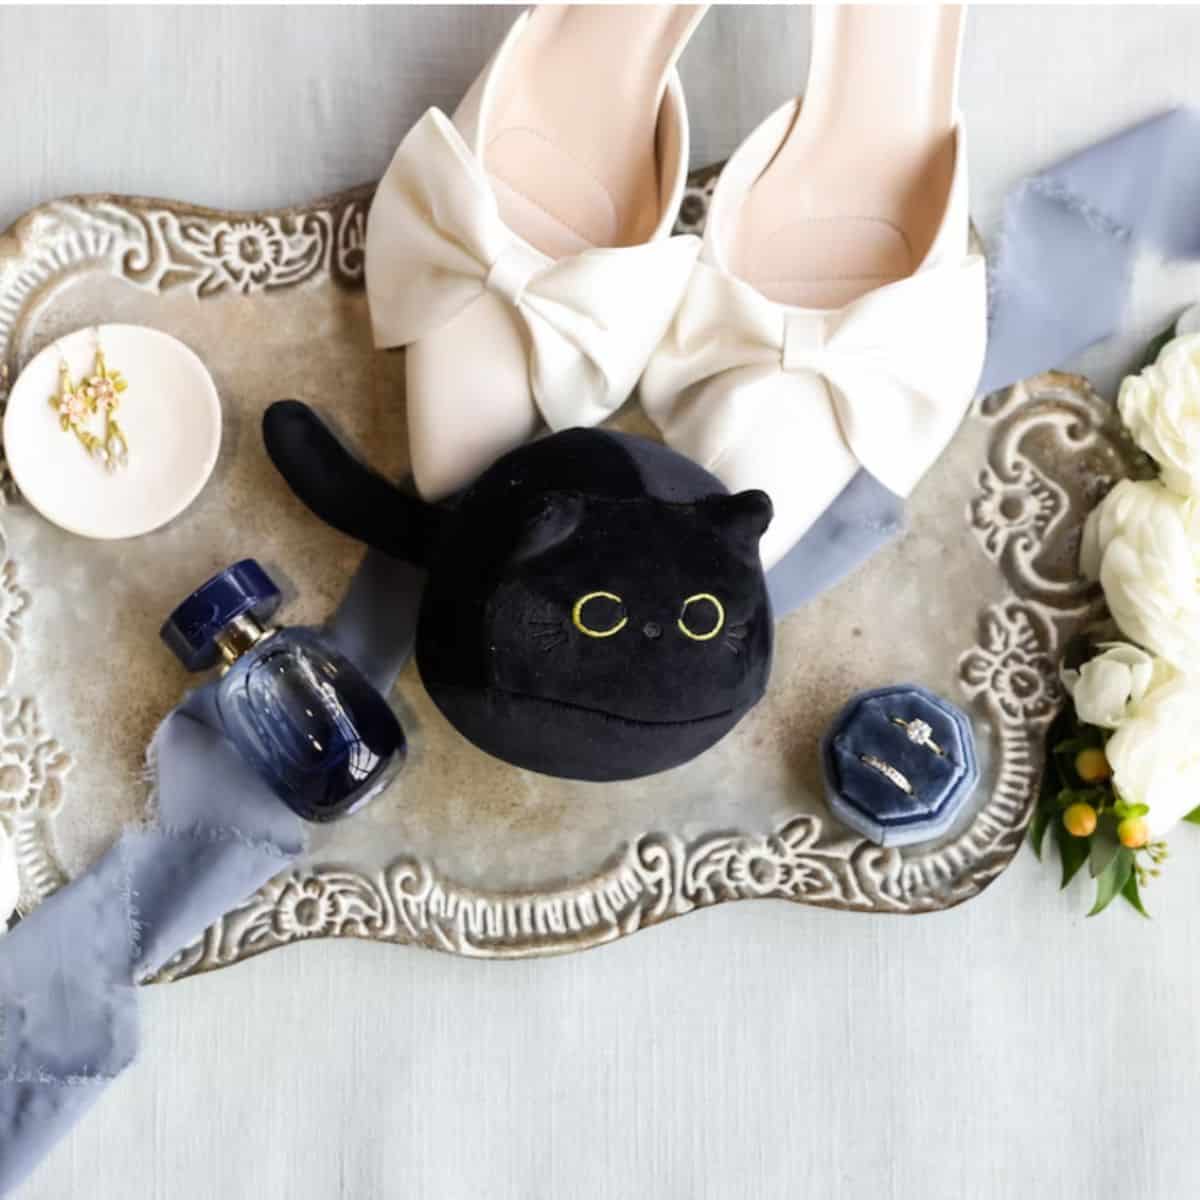 shoes, perfume and cat toy